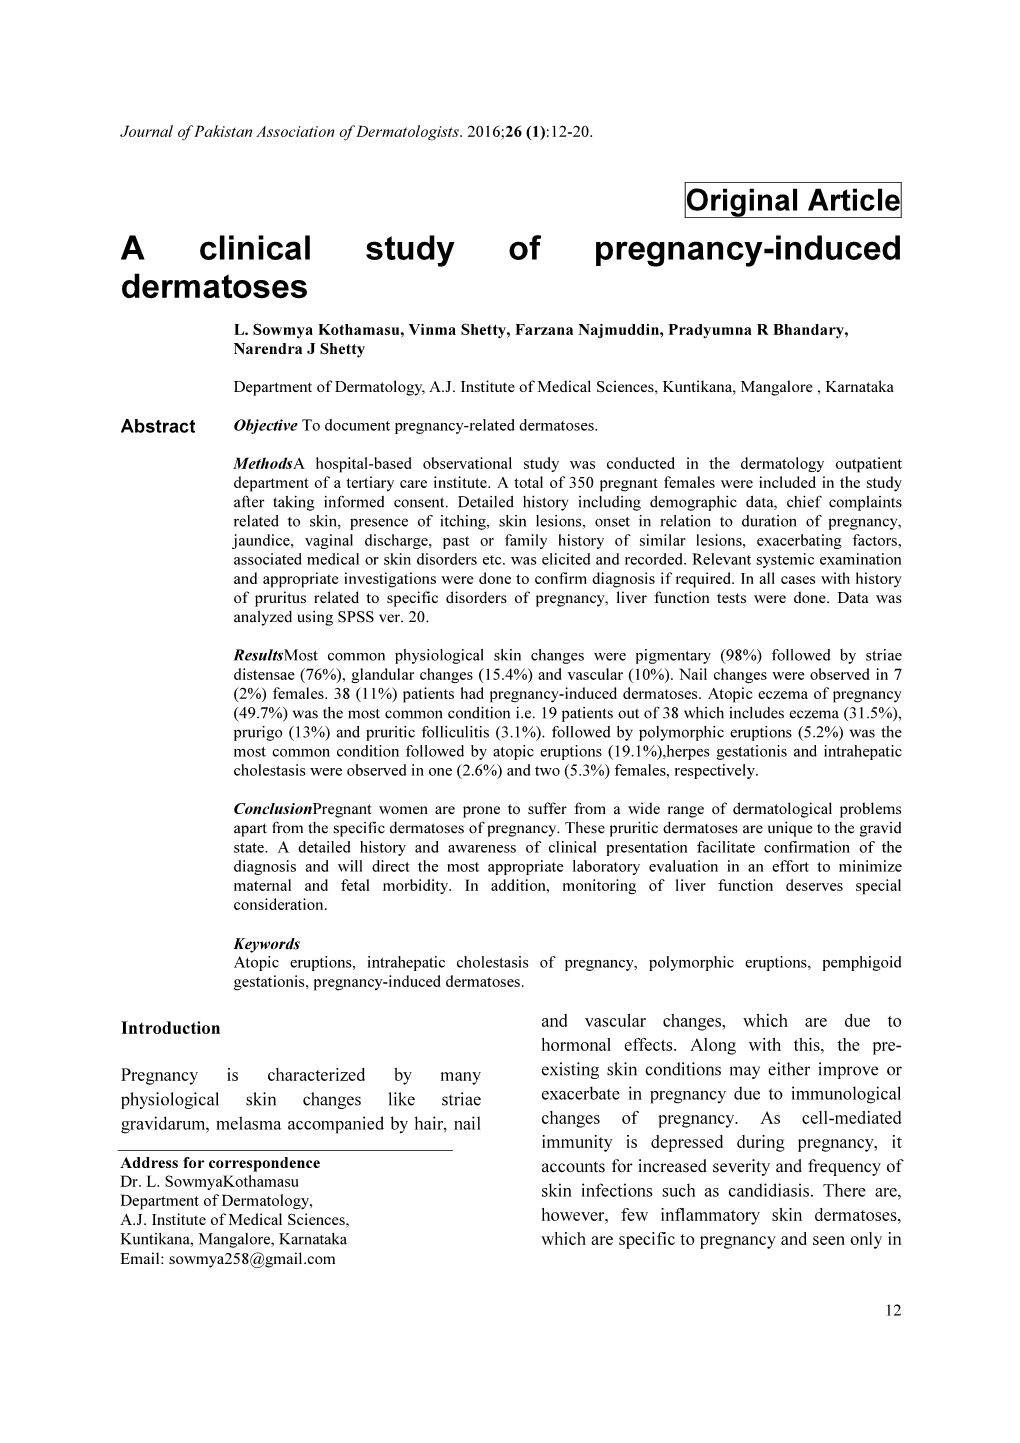 A Clinical Study of Pregnancy-Induced Dermatoses